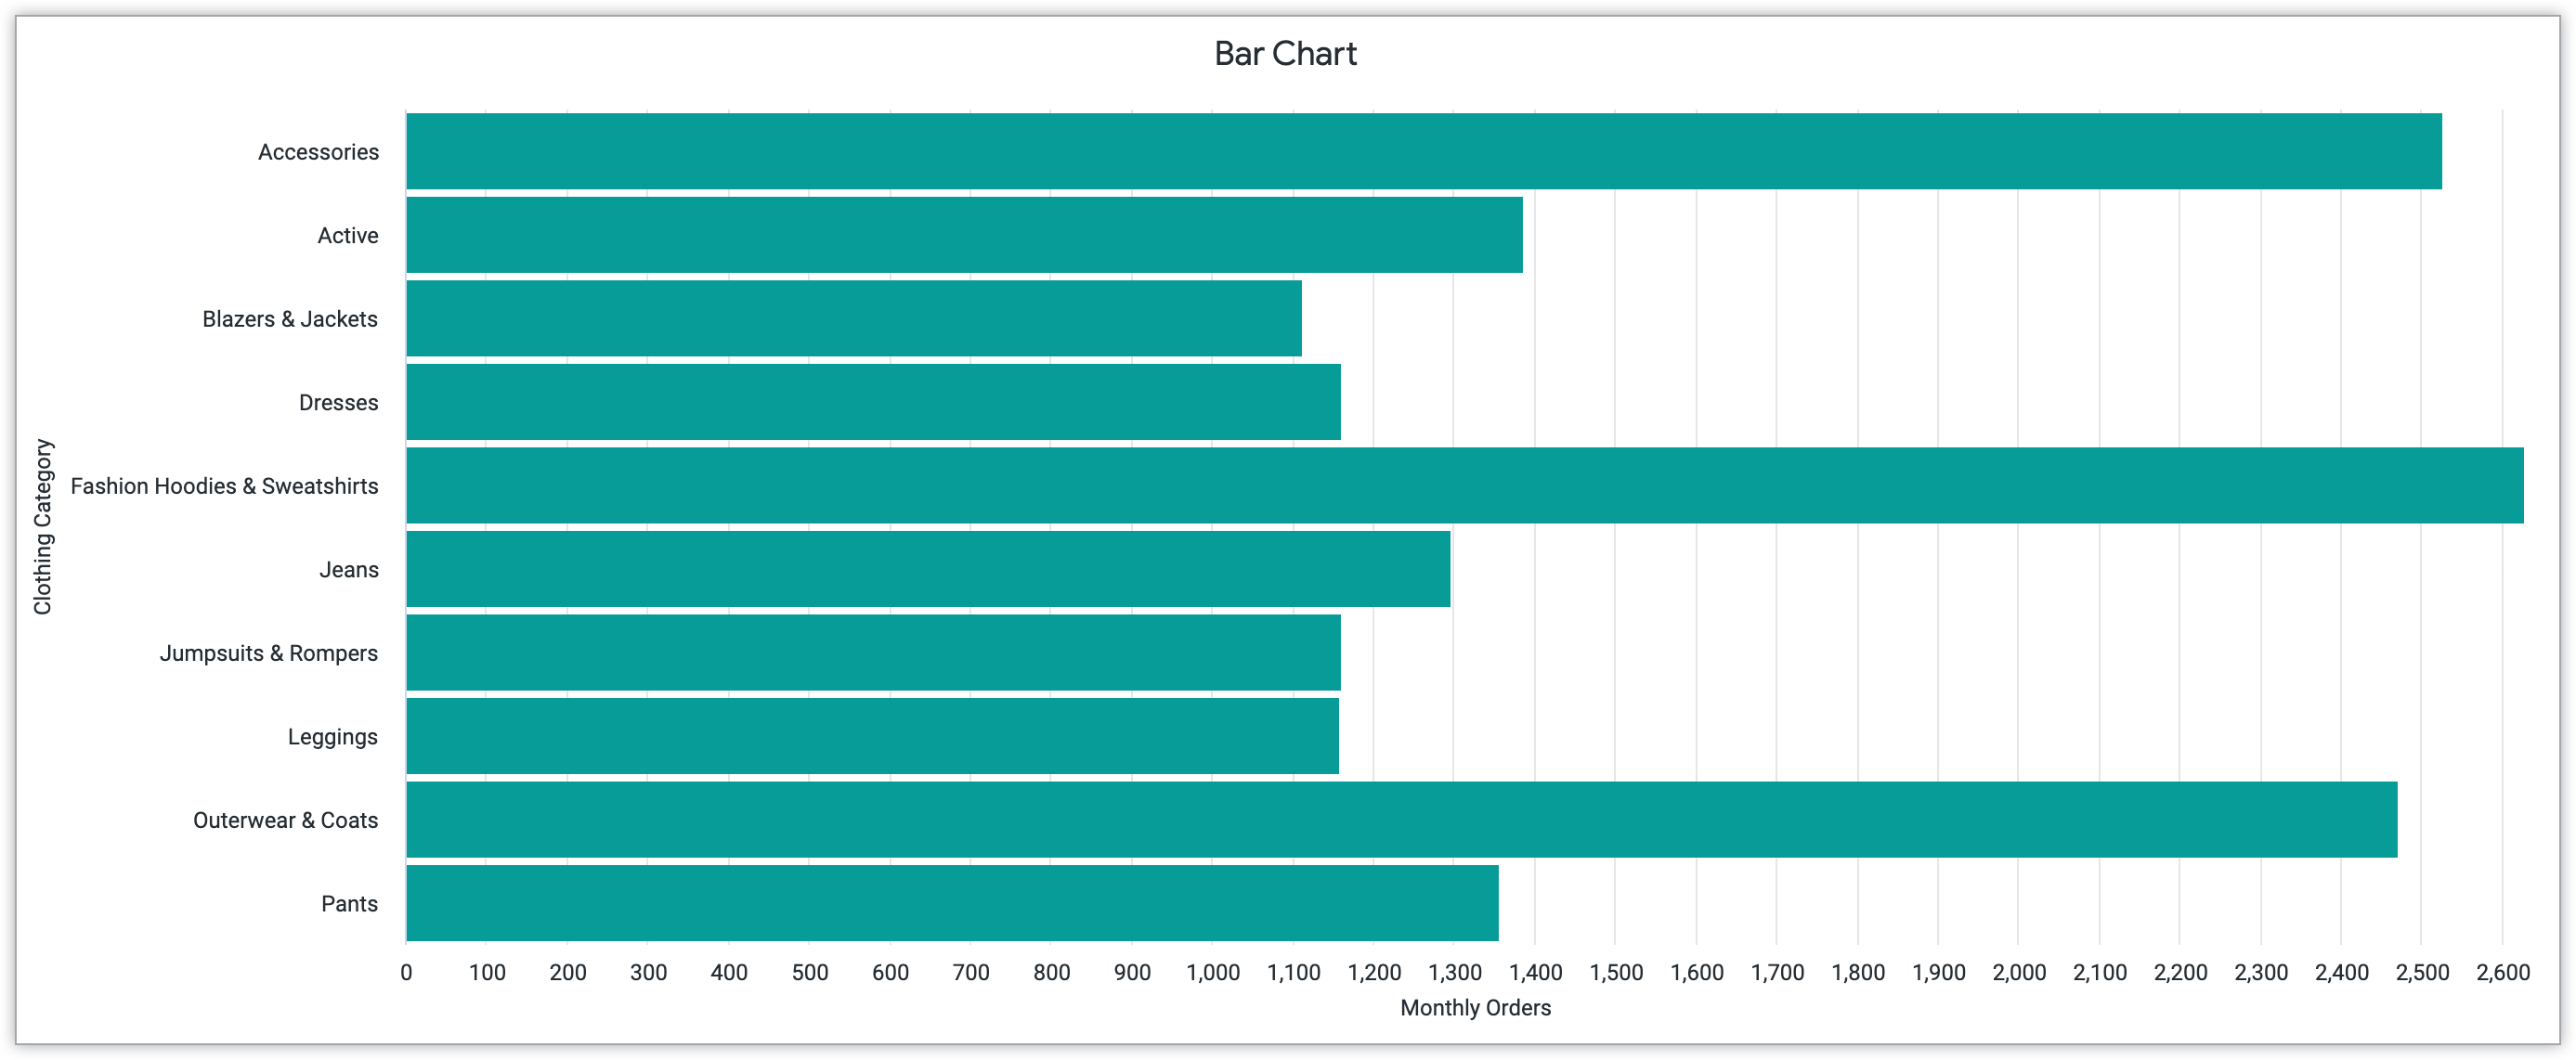 Bar chart with Monthly Orders on the x-axis and Clothing Category on the y-axis.